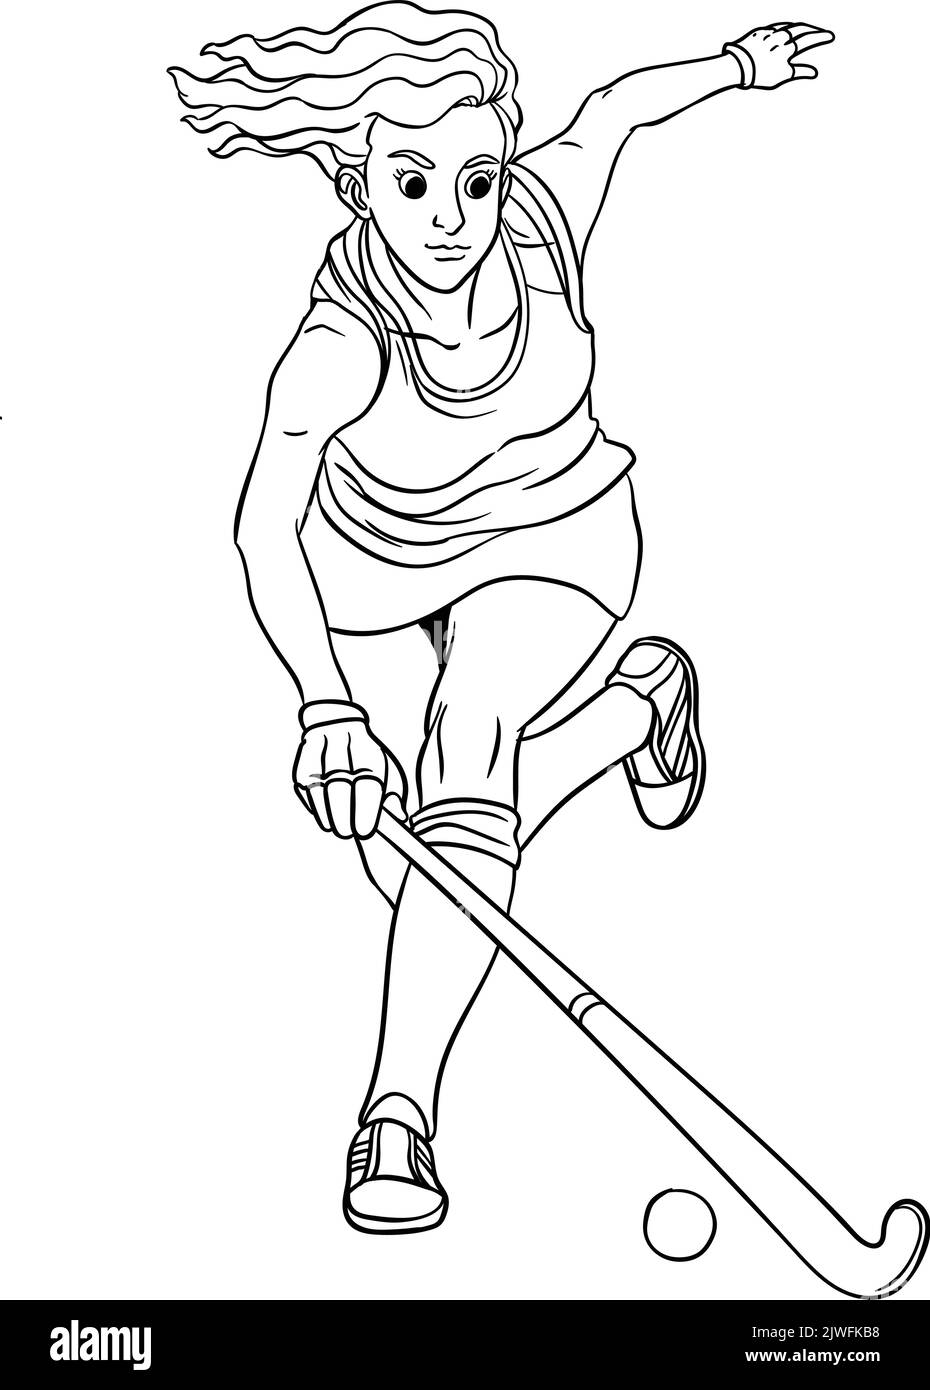 Field Hockey Isolated Coloring Page for Kids Stock Vector